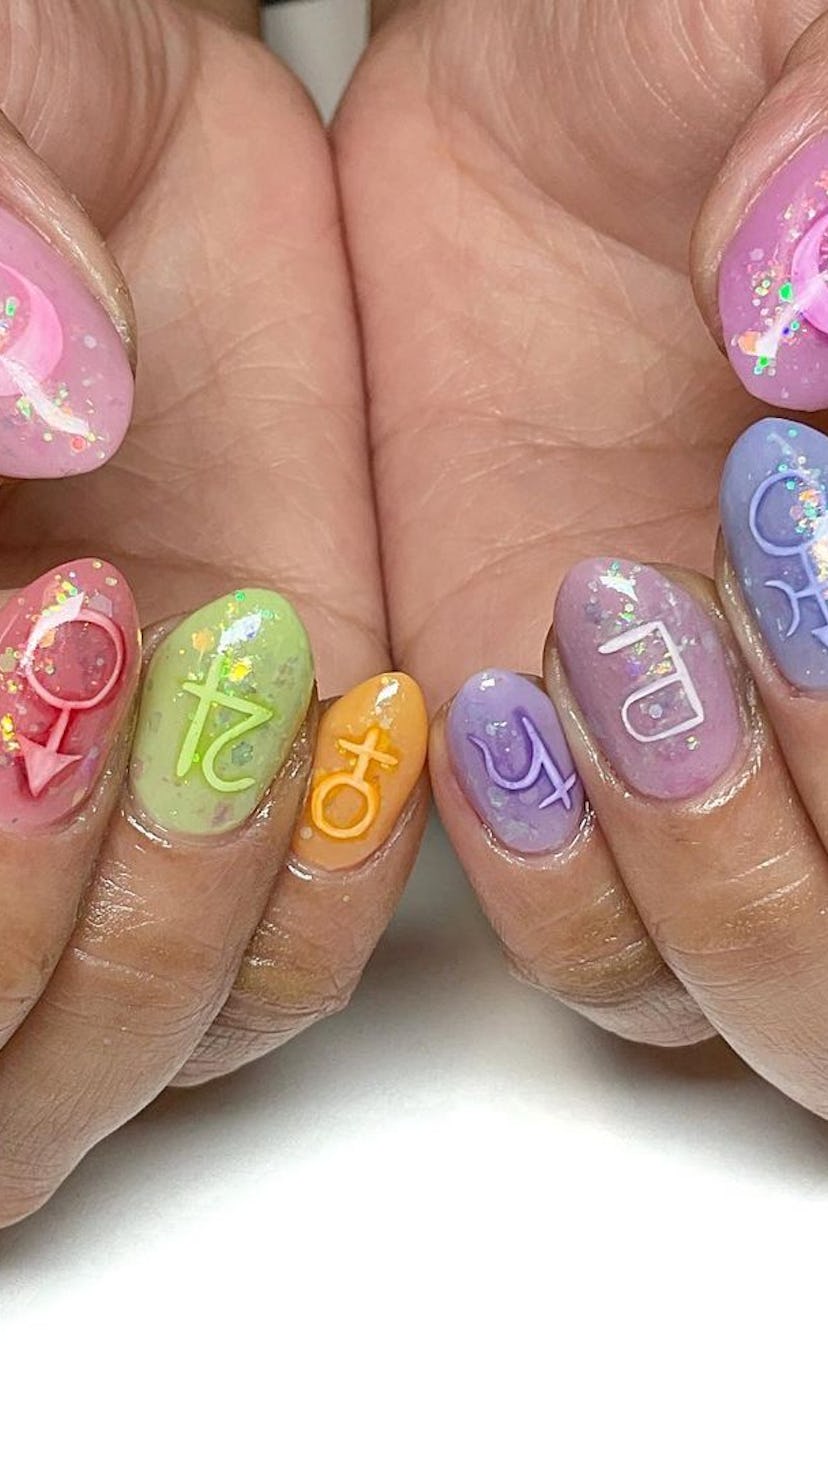 rainbow jelly nails with astrological signs